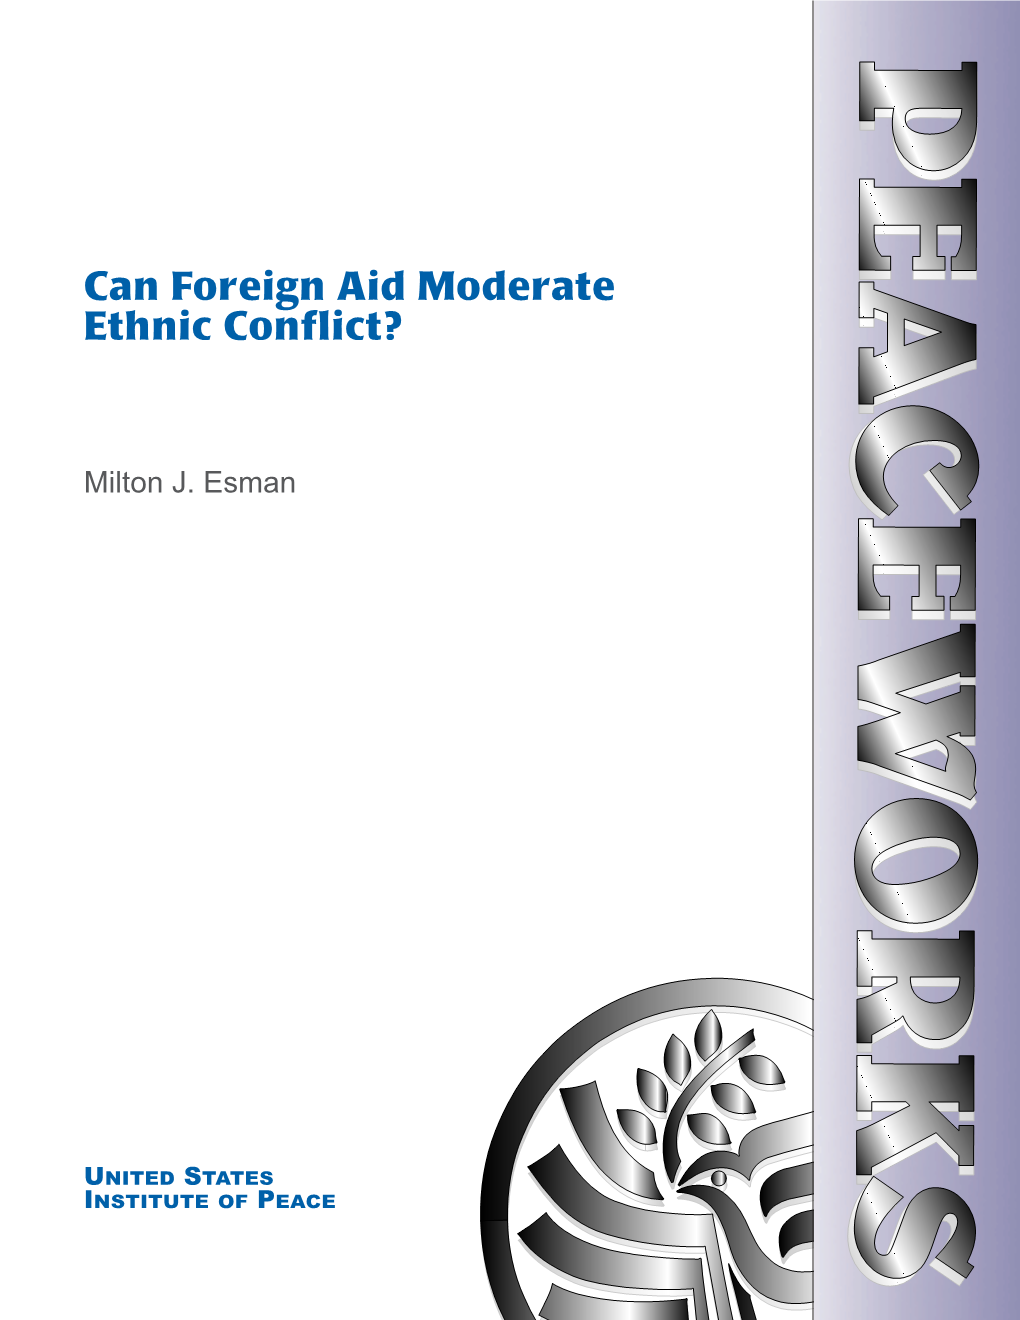 Can Foreign Aid Moderate Ethnic Conflict?